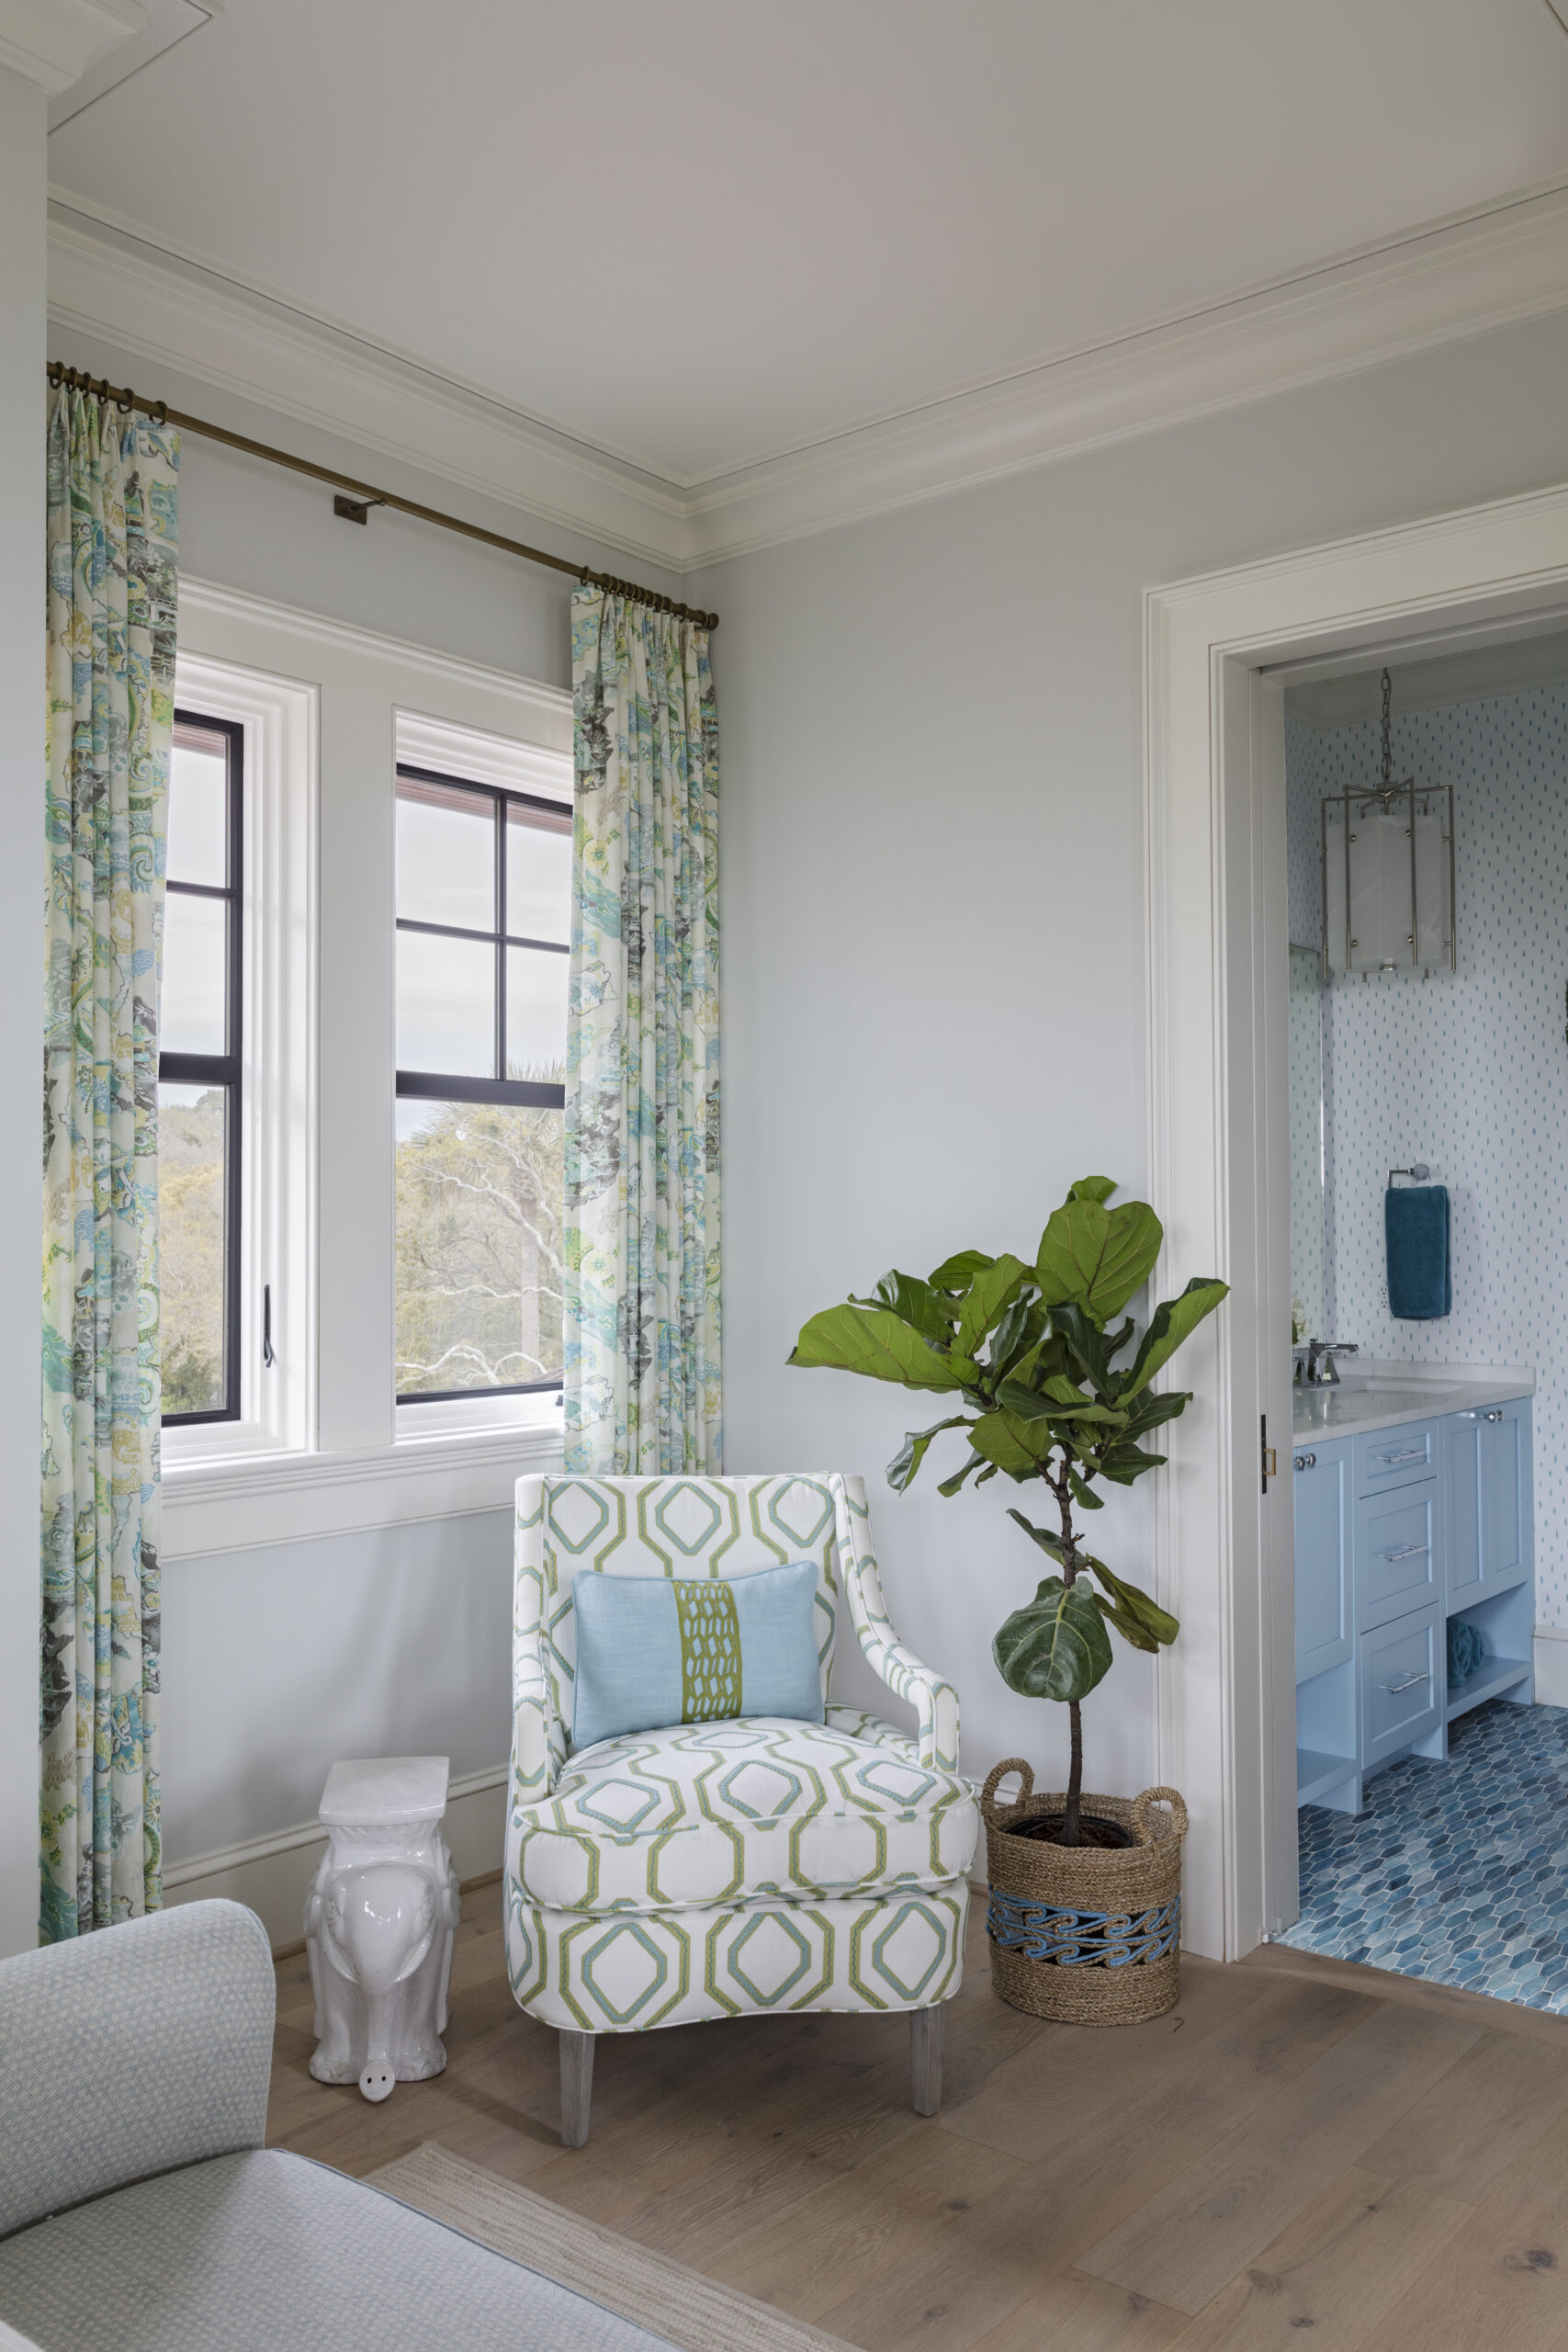 Home tour featuring transitional bedroom in white, green and blue decor, designed by Margaret Donaldson